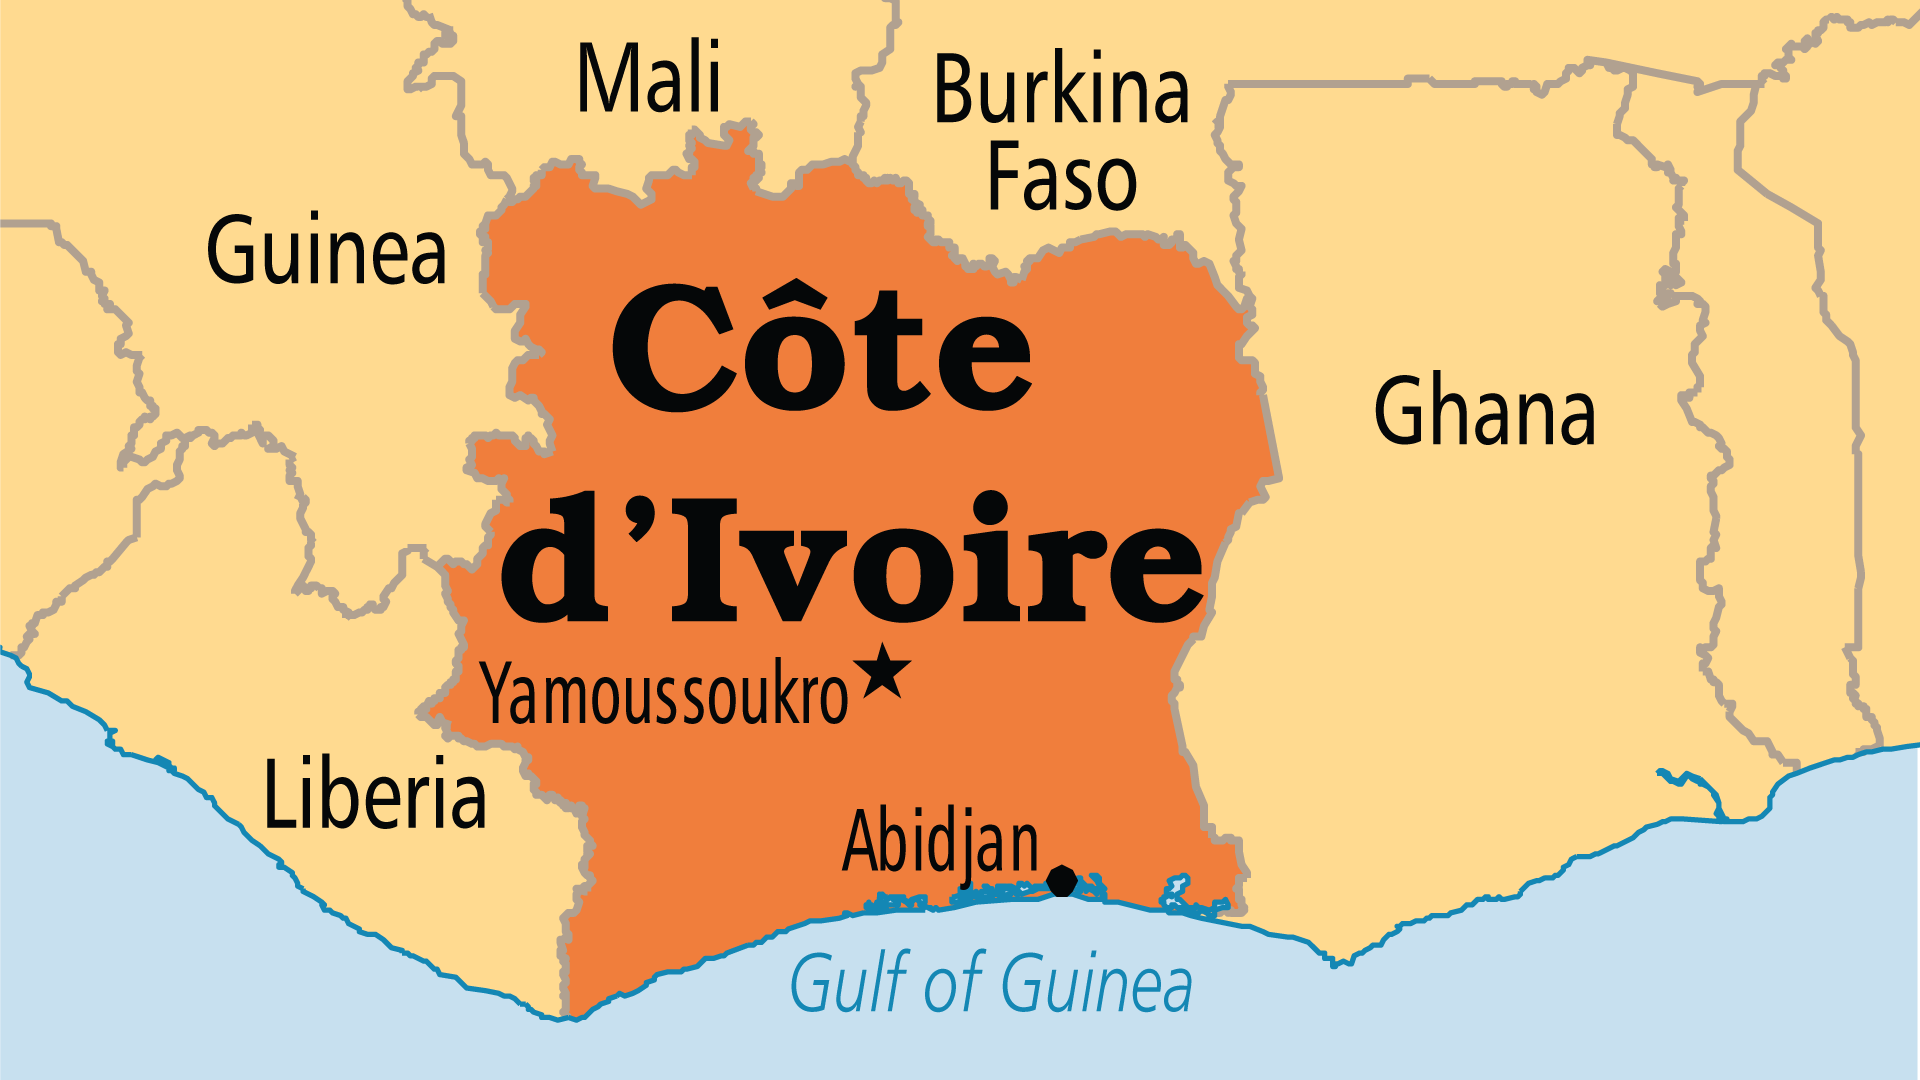 State Majestic request Cote d'Ivoire - Operation World